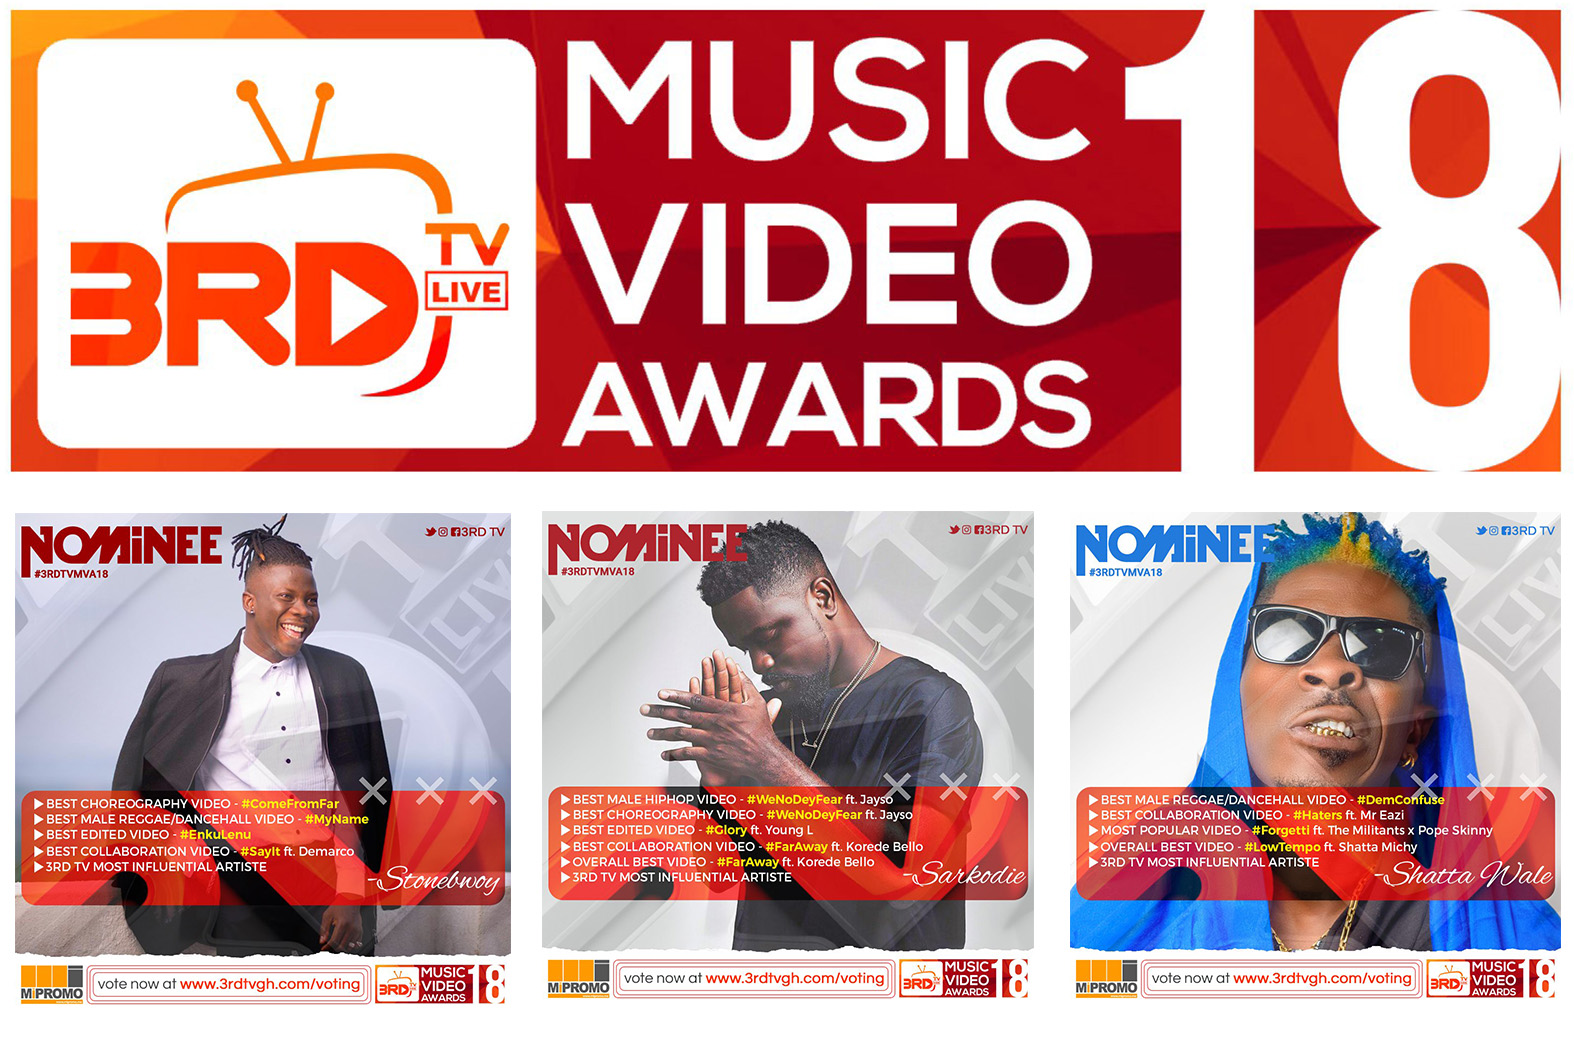 Stonebwoy & Sarkodie lead nominees for 2018 3RD TV Music Video Awards